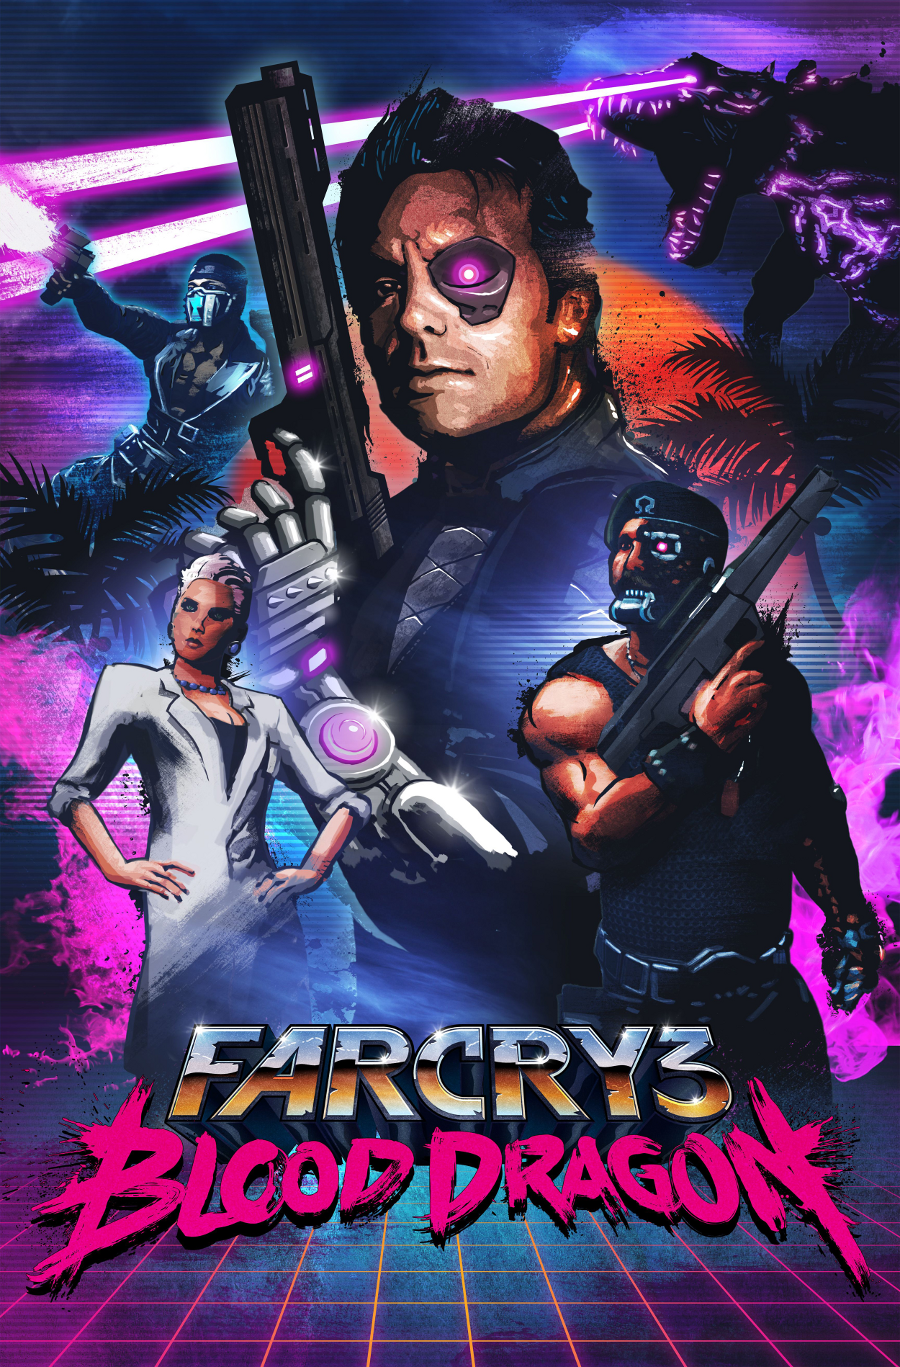 News Added Apr 30, 2013 Soundtrack to the upcoming game "Far cry 3: Blood Dragon", produced by australian retro-futuristic electro artist "Power Glove". Submitted By shaaaa Track list: Added Apr 30, 2013 1 Rex Colt 2 Blood Dragon Theme 3 Helo-73 4 Warzone 5 Moment of Calm 6 Dr Elizabeth Darling 7 Power Core 8 […]